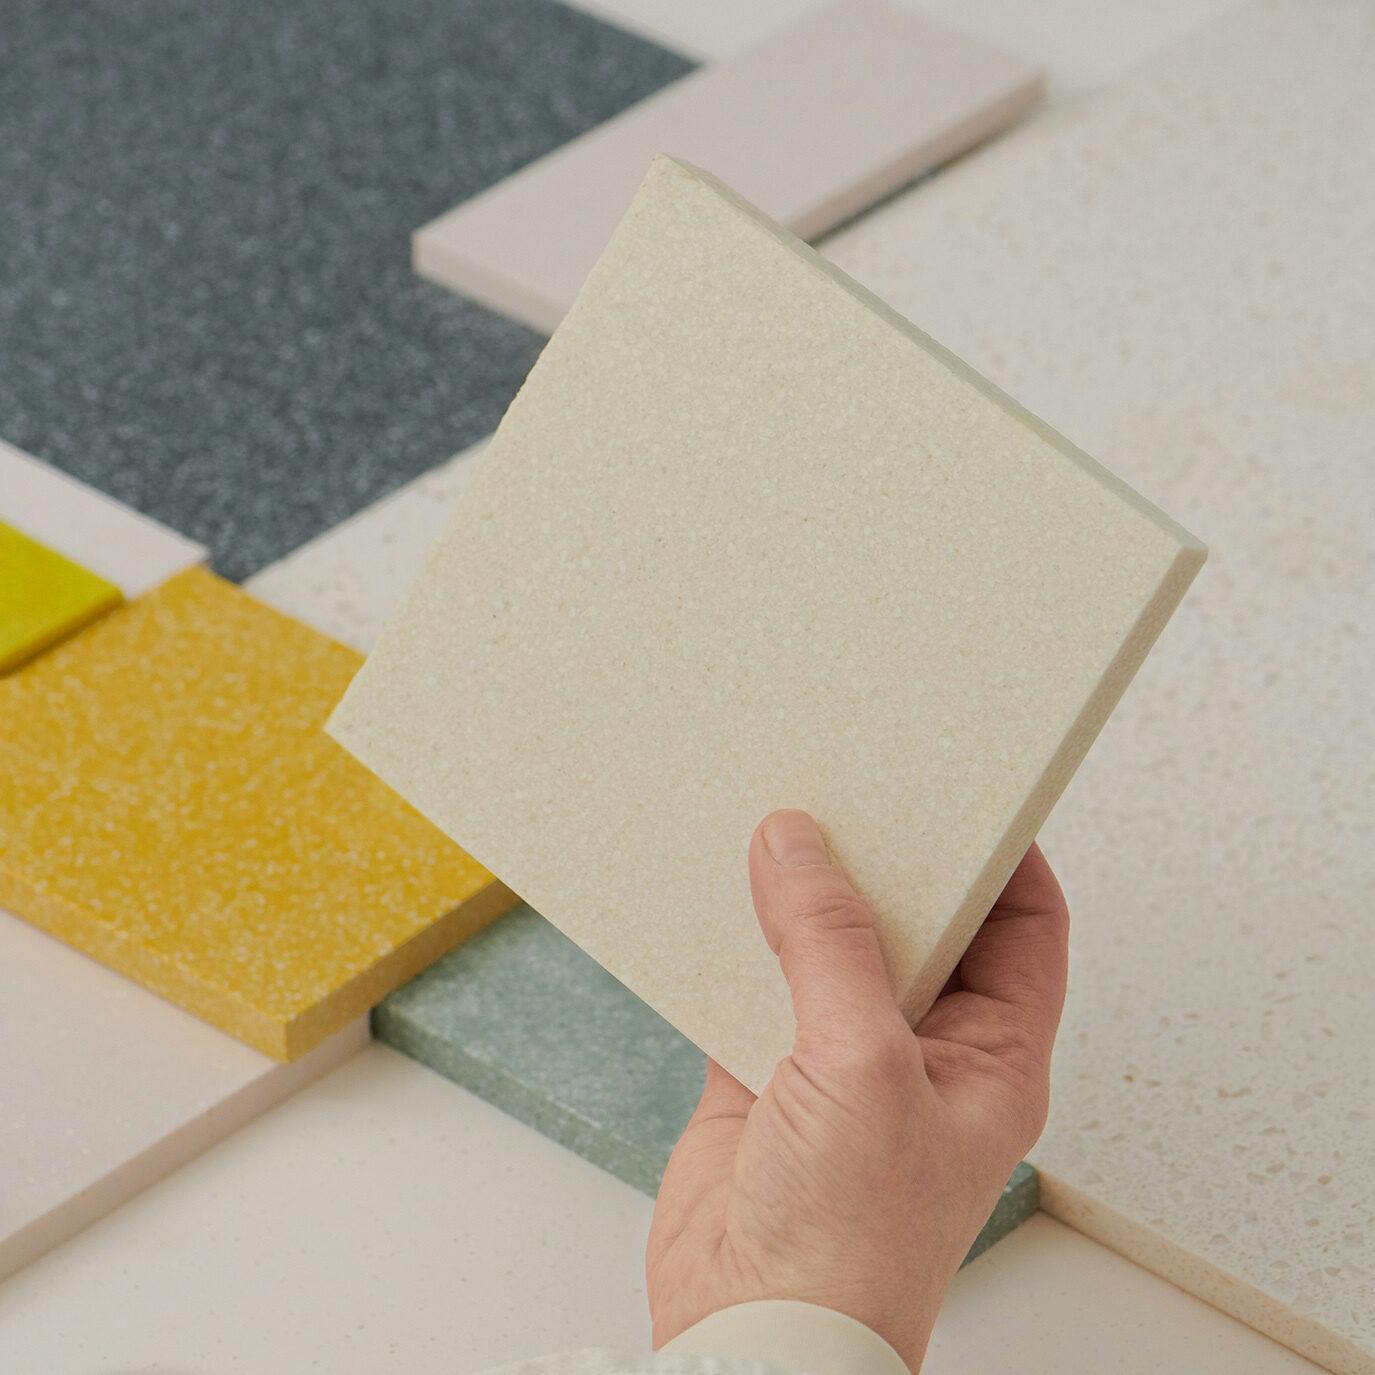 Durat Plus samples moodboard - first to market circular solid surface with 80% content.